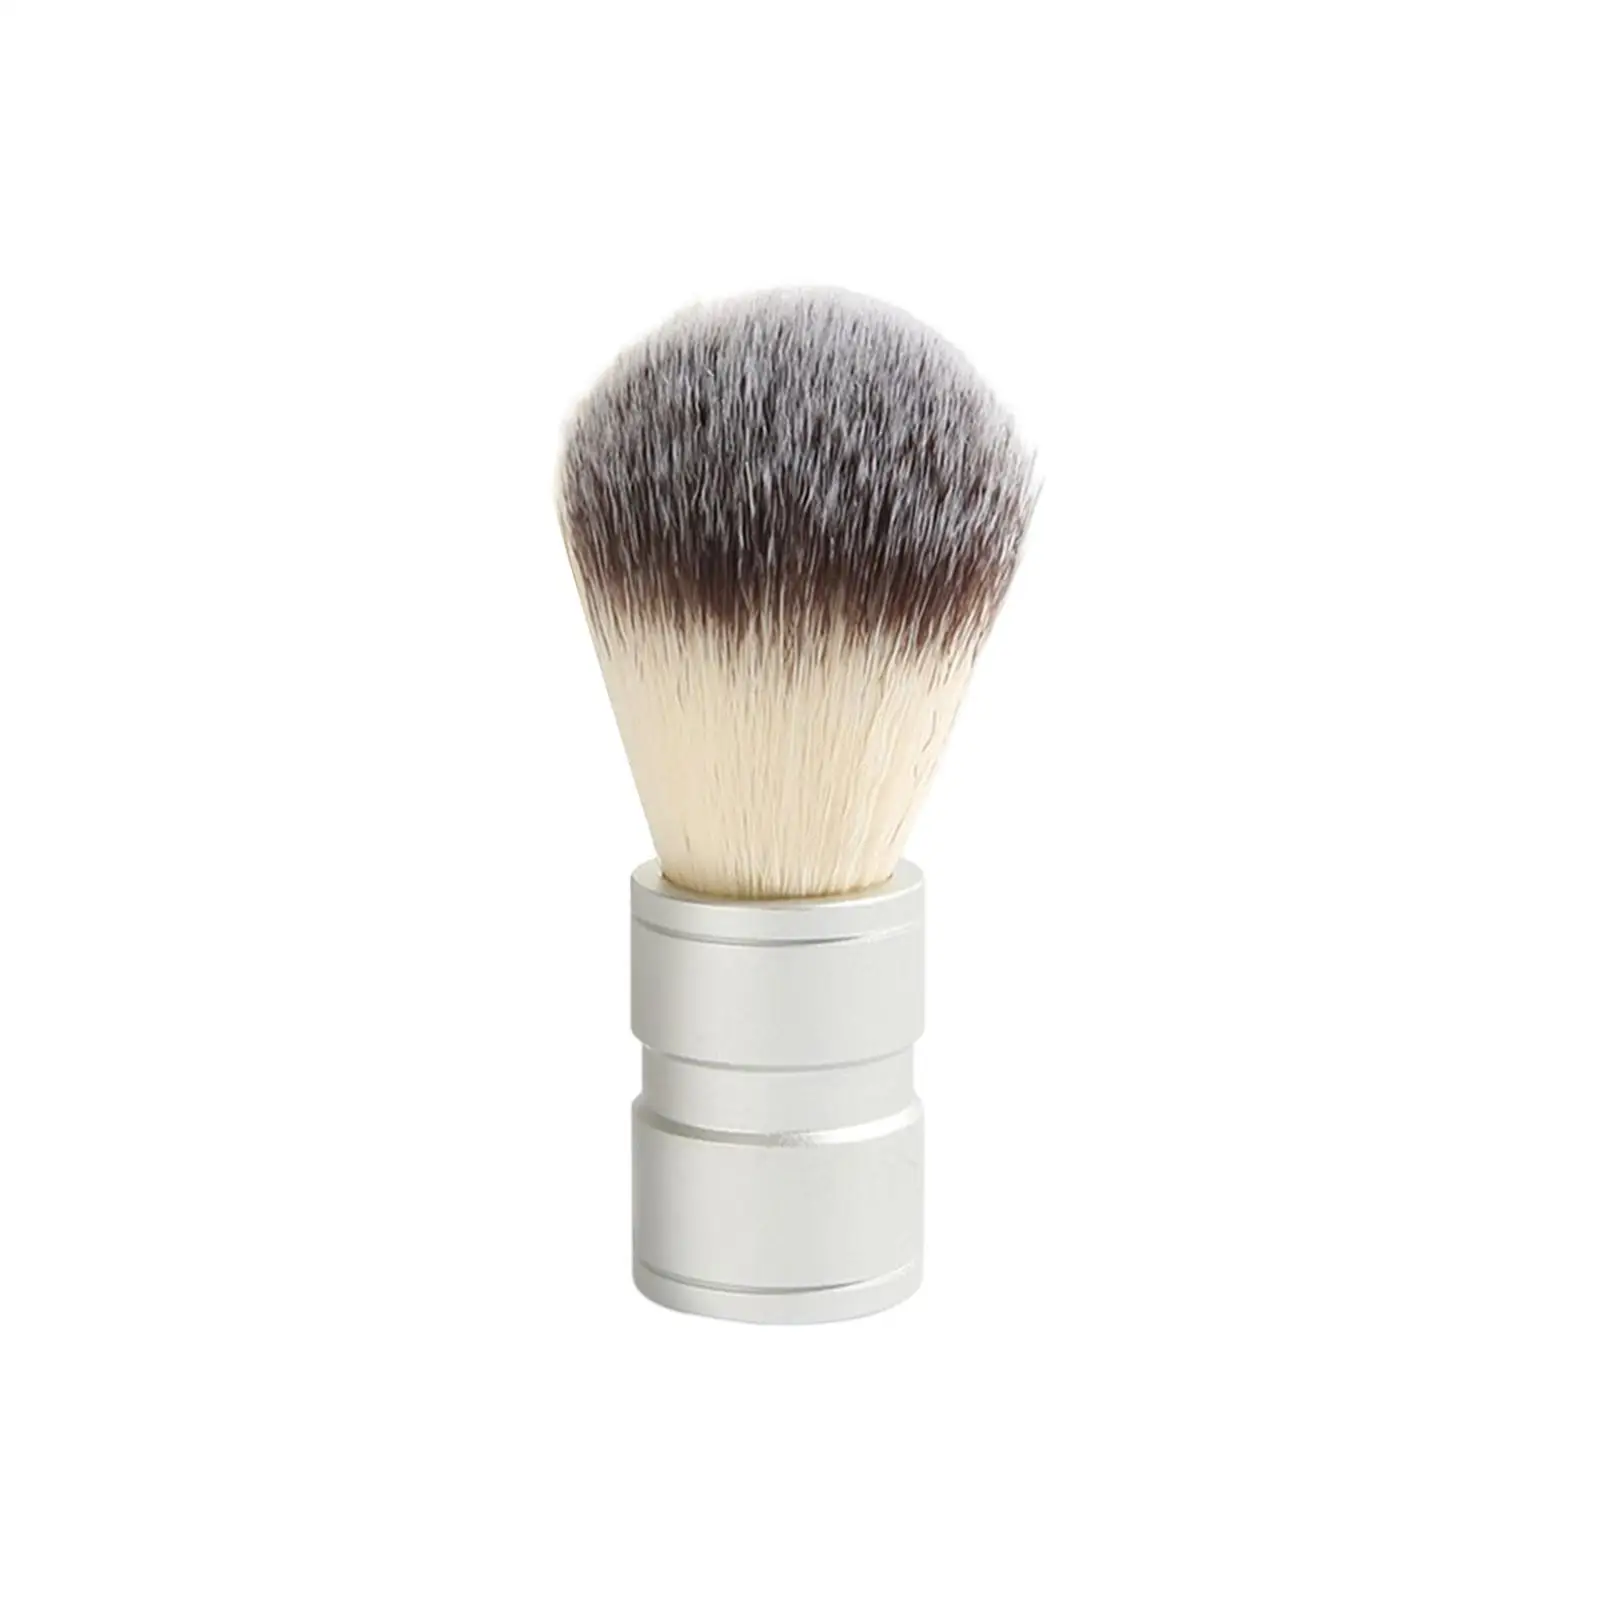 Professional Hair Shaving Brush Soft for Father Barbershop Festival Gifts